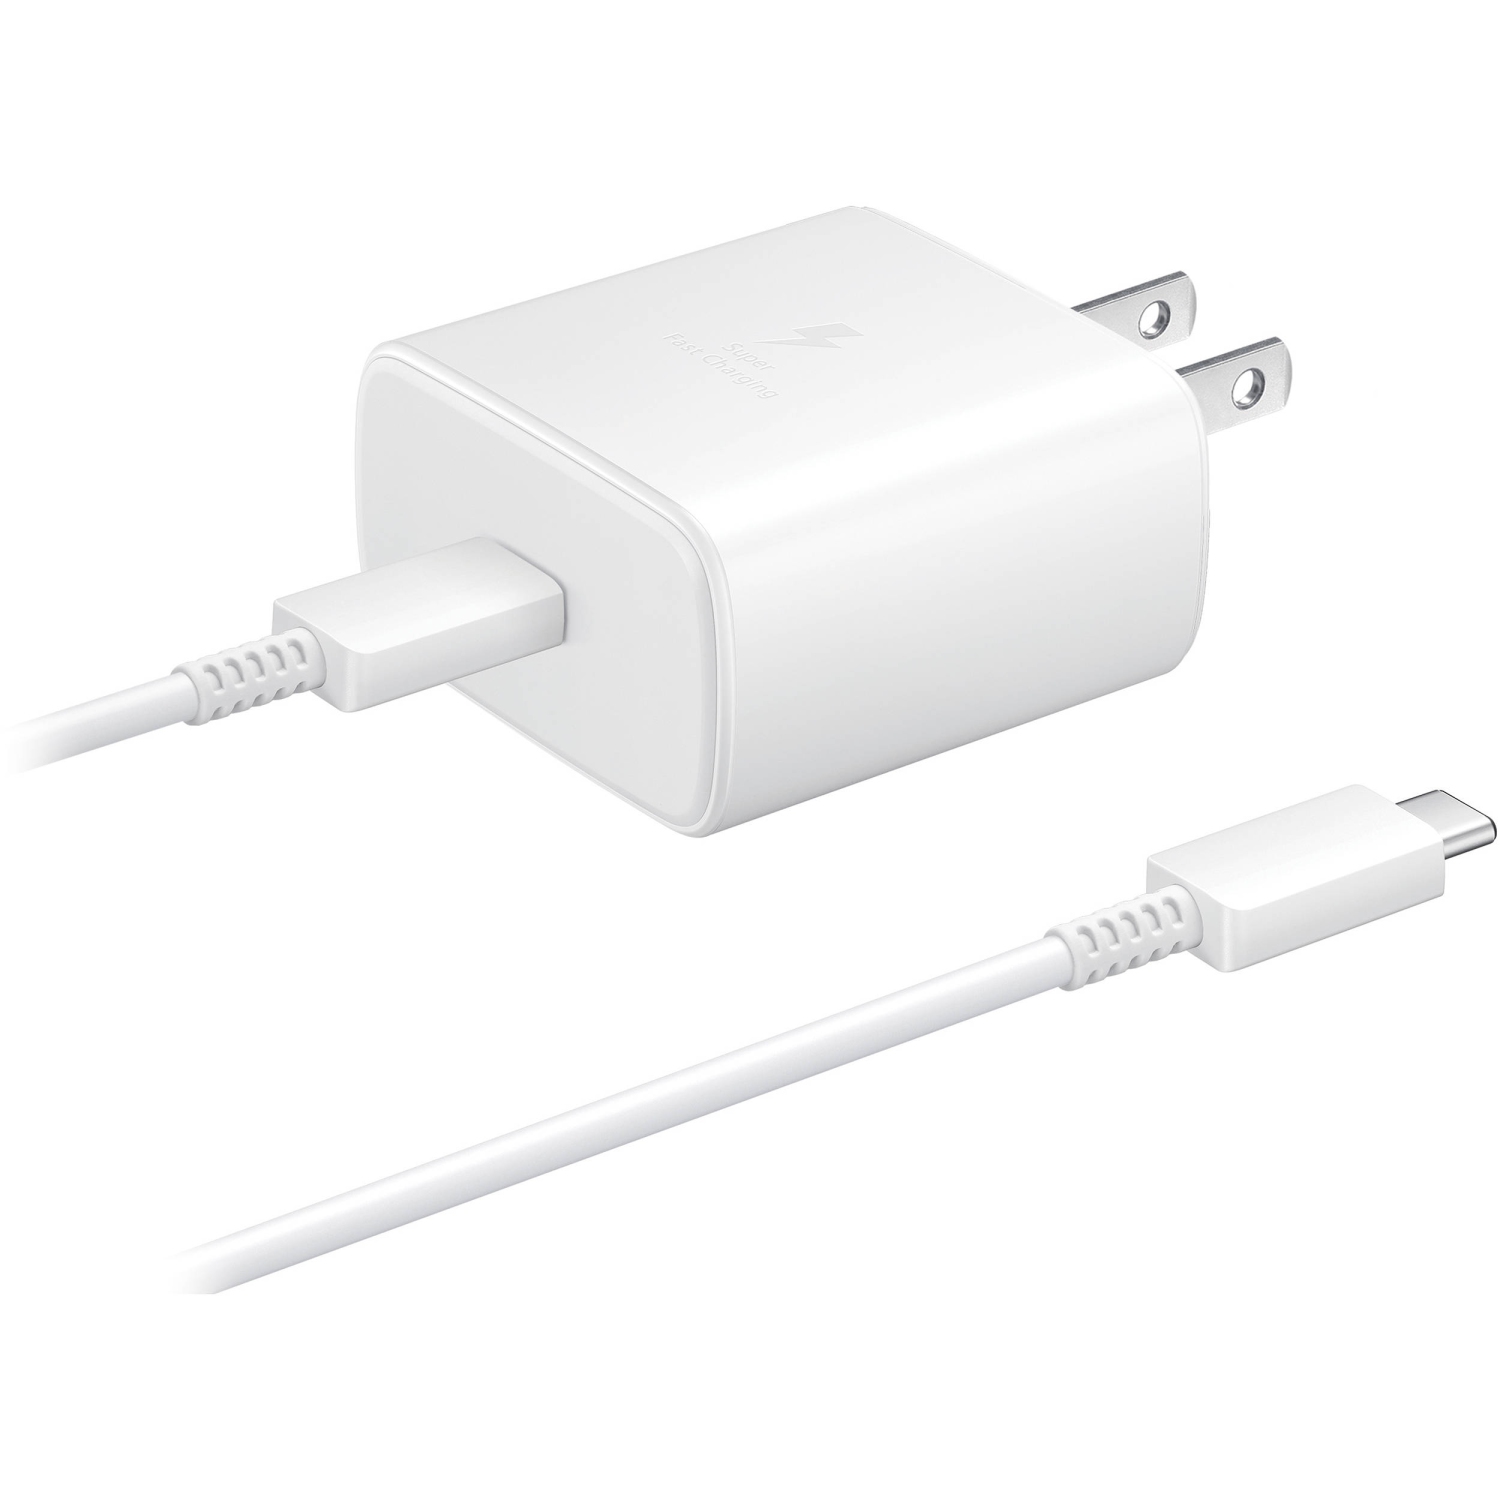 45W USB-C PD PPS Super Fast Charging Wall Charger Adapter + 1m Type C Cable for Samsung Galaxy S10 S20 Note 10 20 Ultra, White